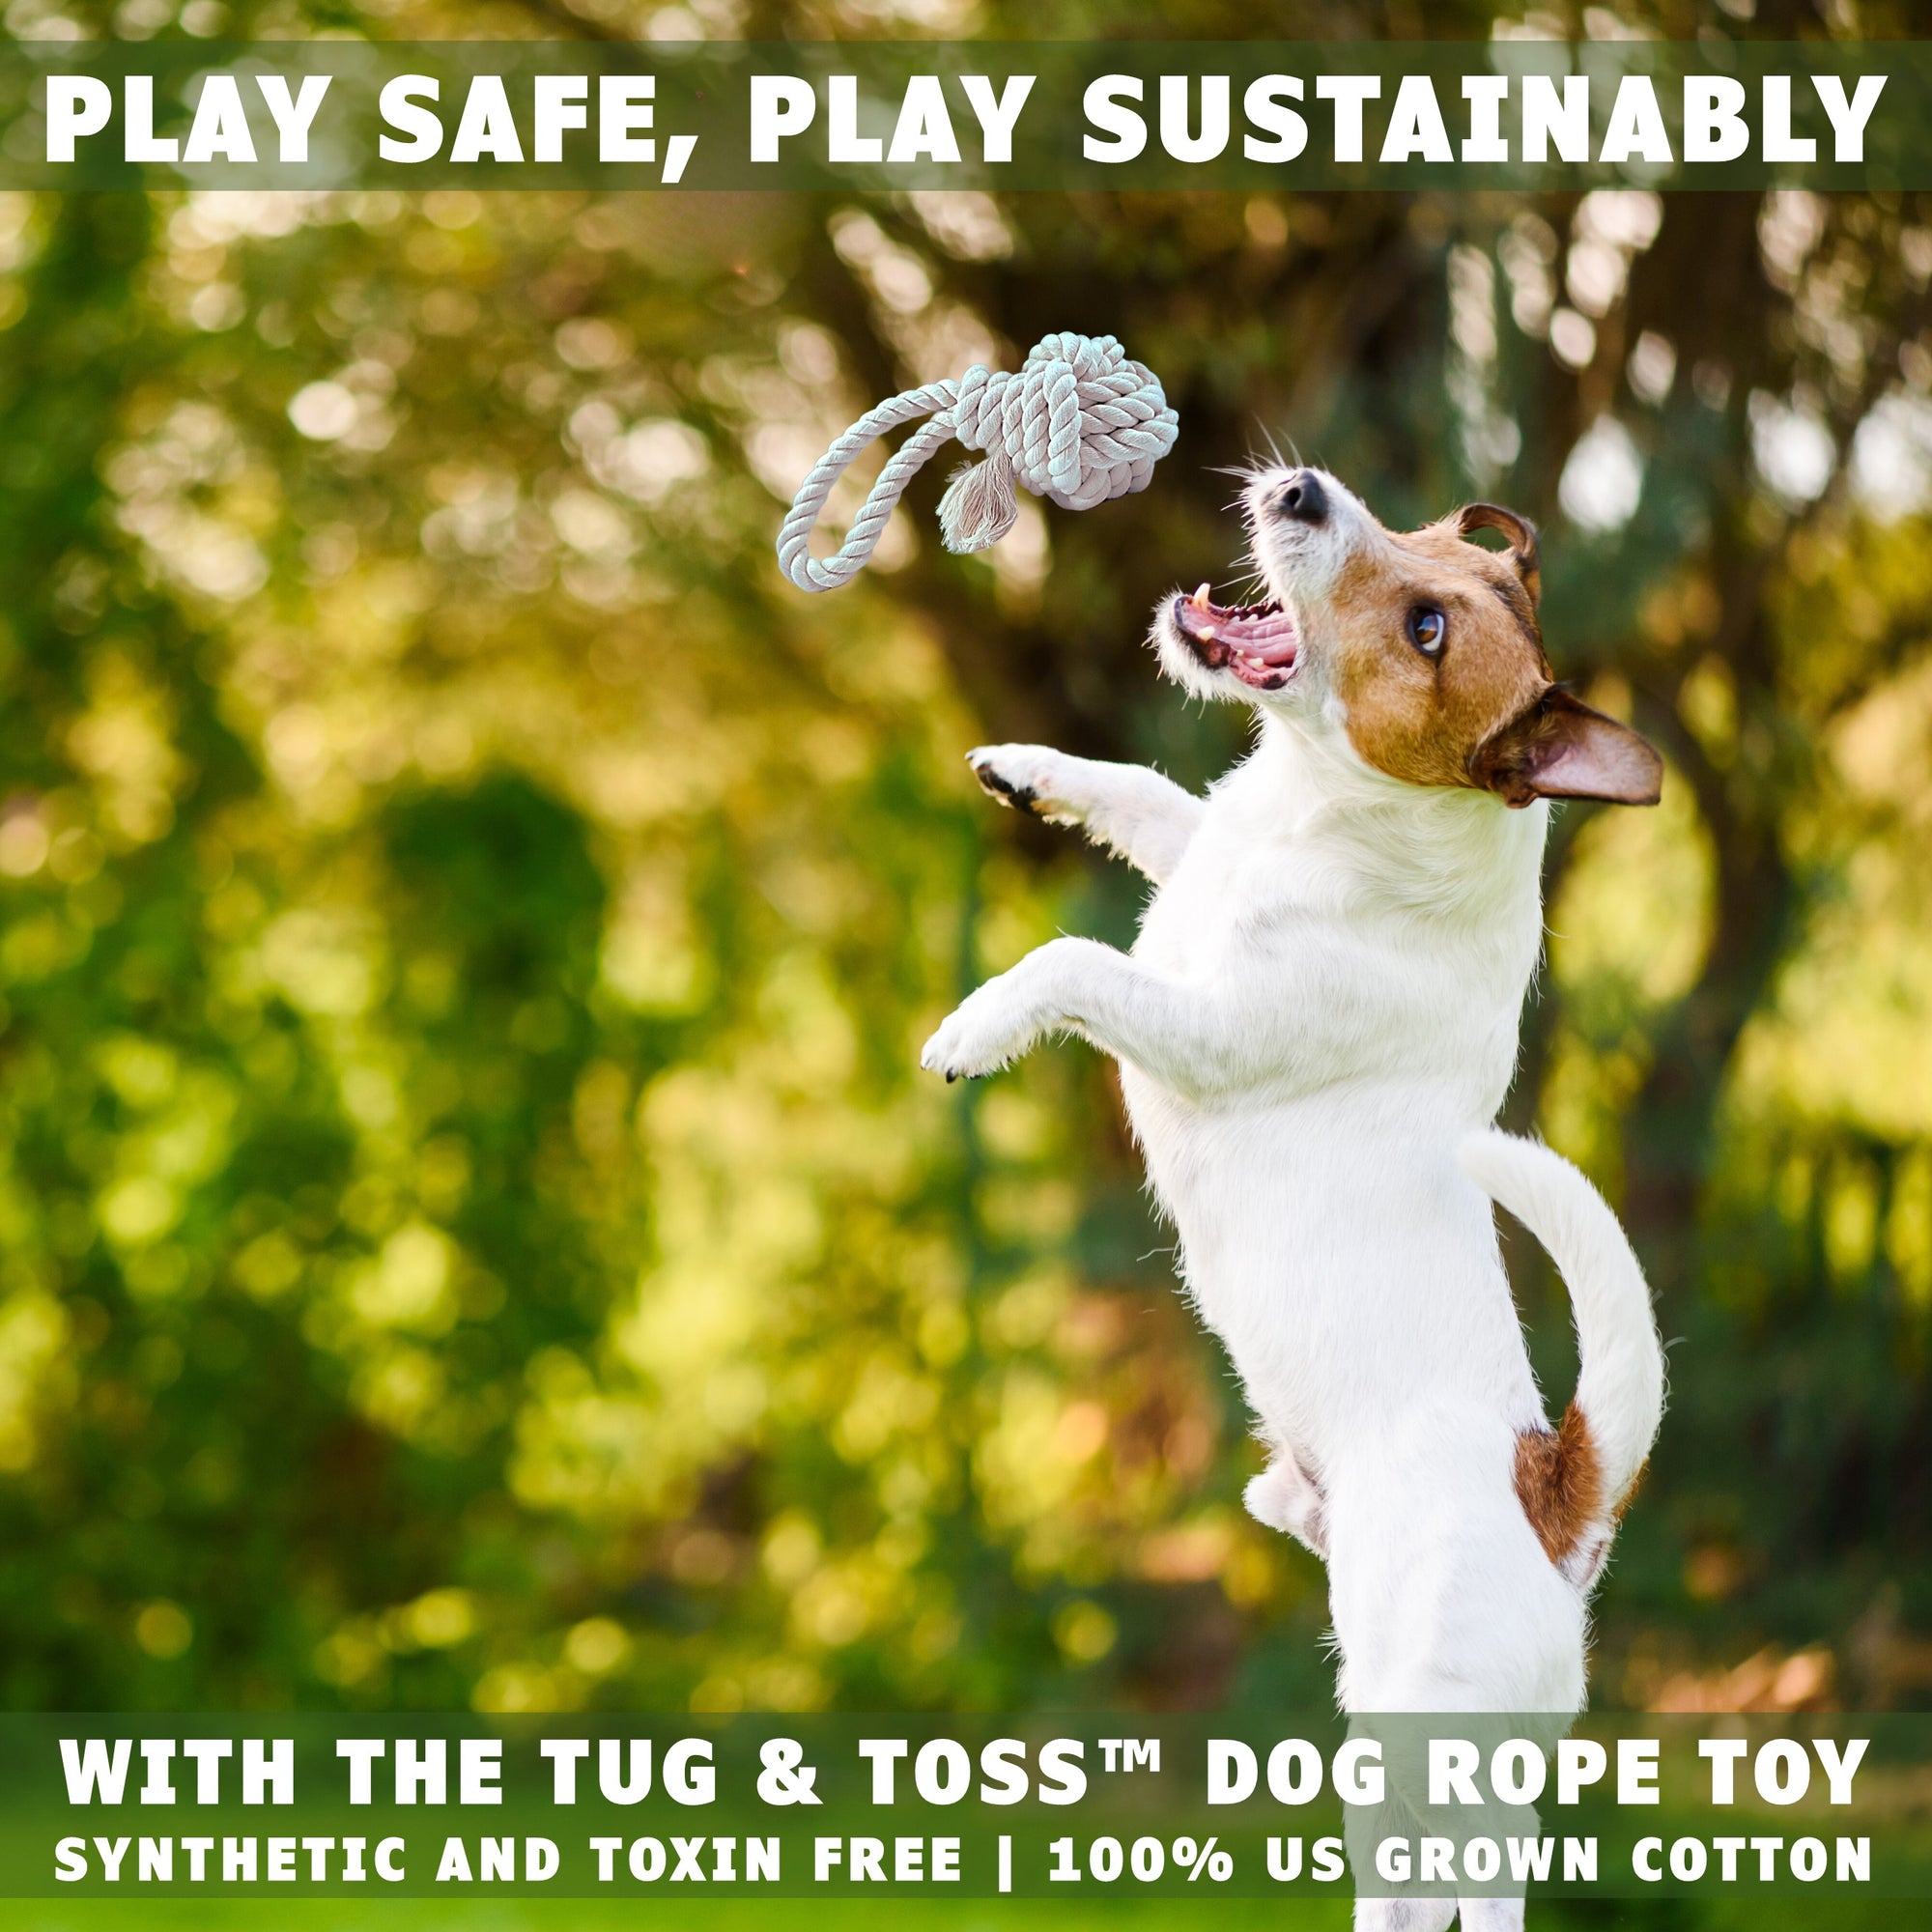 Dog jumping after a dog fetch toy by earthcare